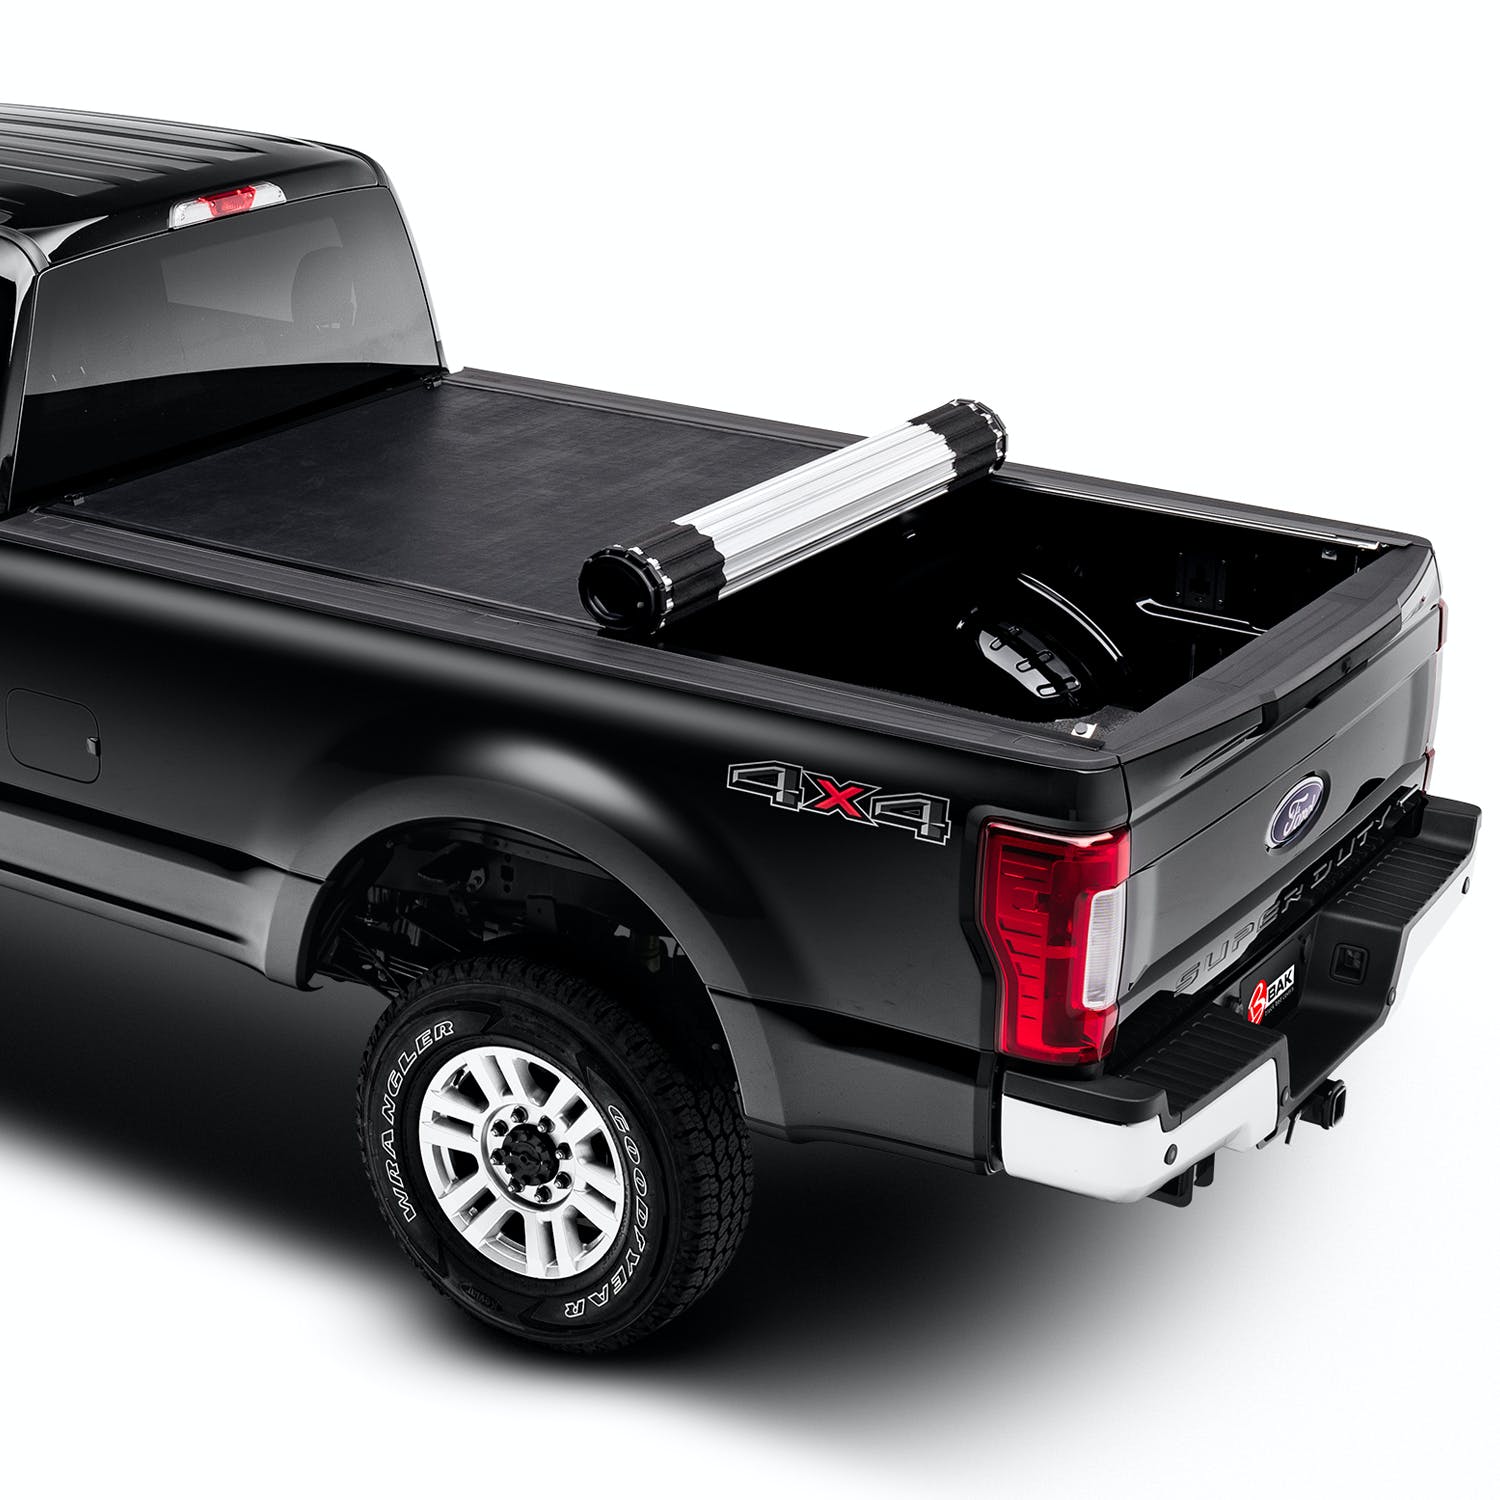 BAK Industries 39311 Revolver X2 Hard Rolling Truck Bed Cover